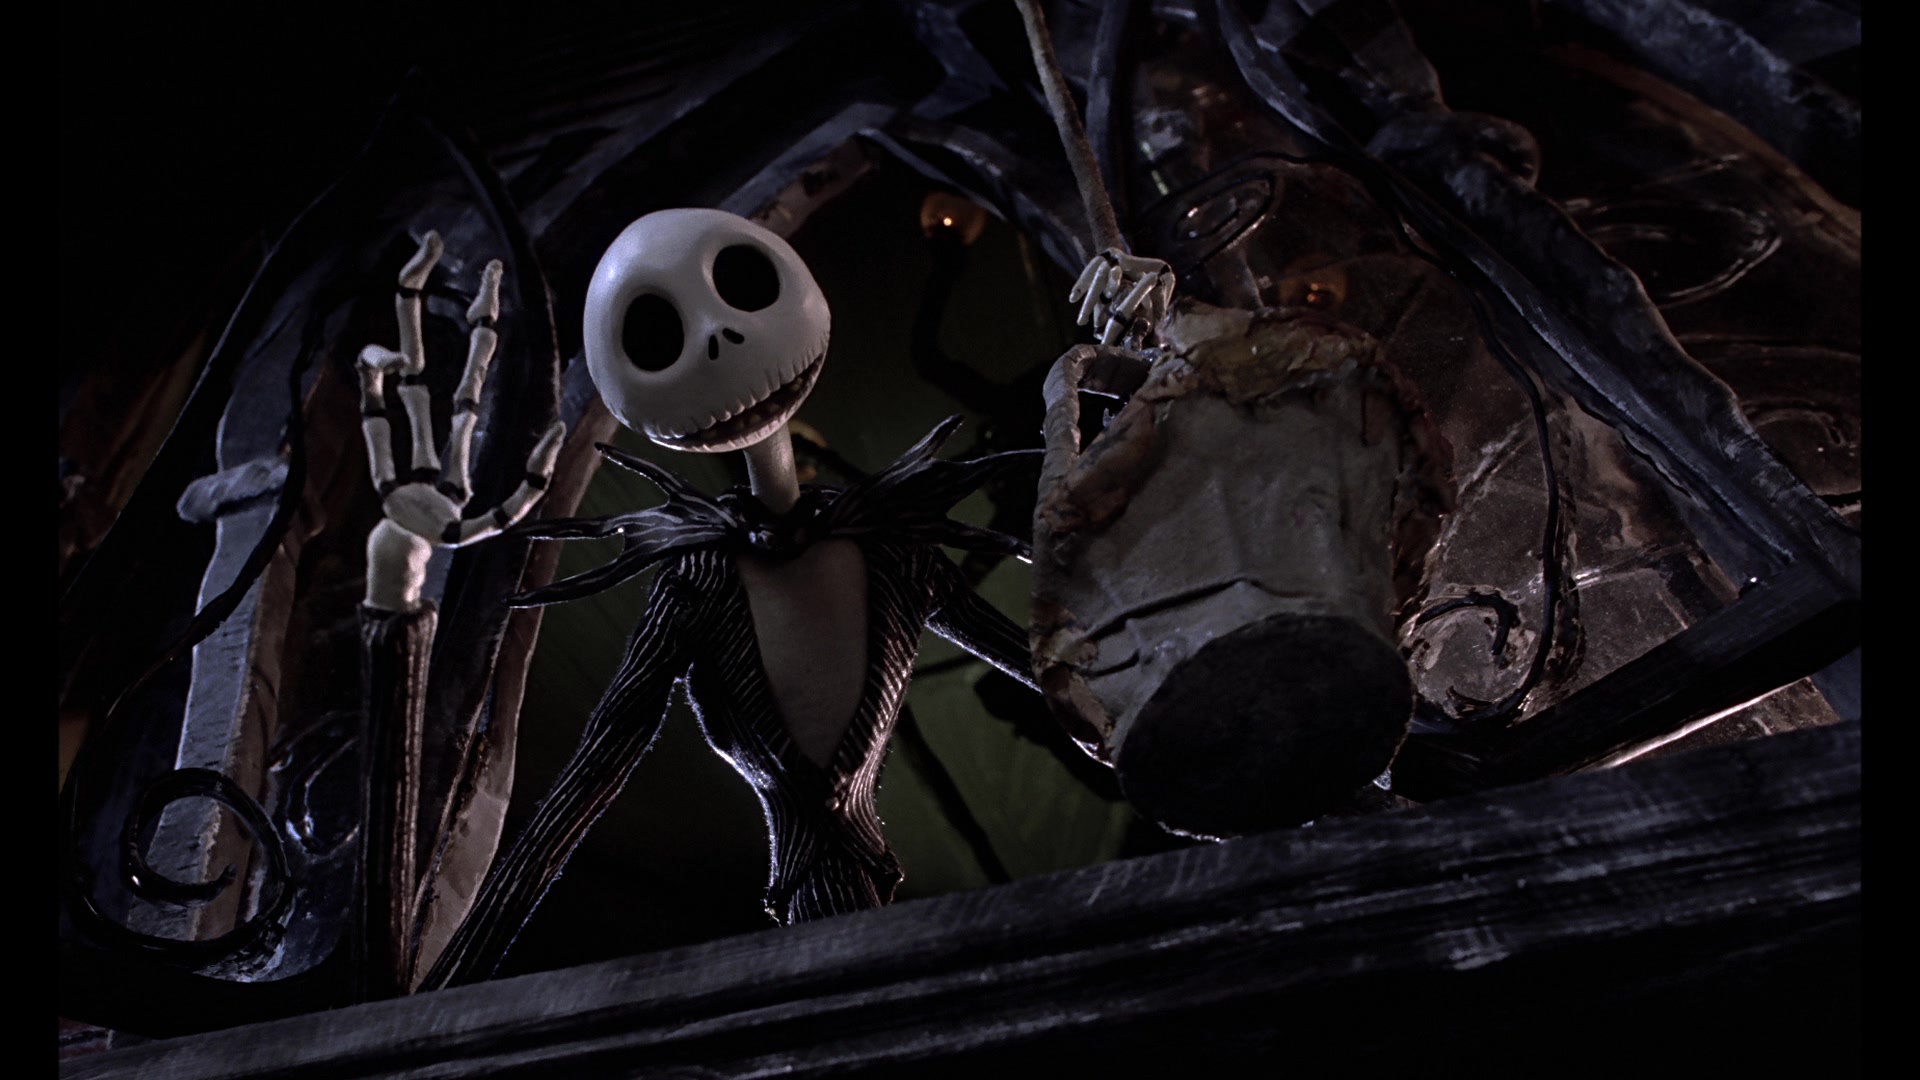 Add Jack Skellington Wallpaper to Your iPhone